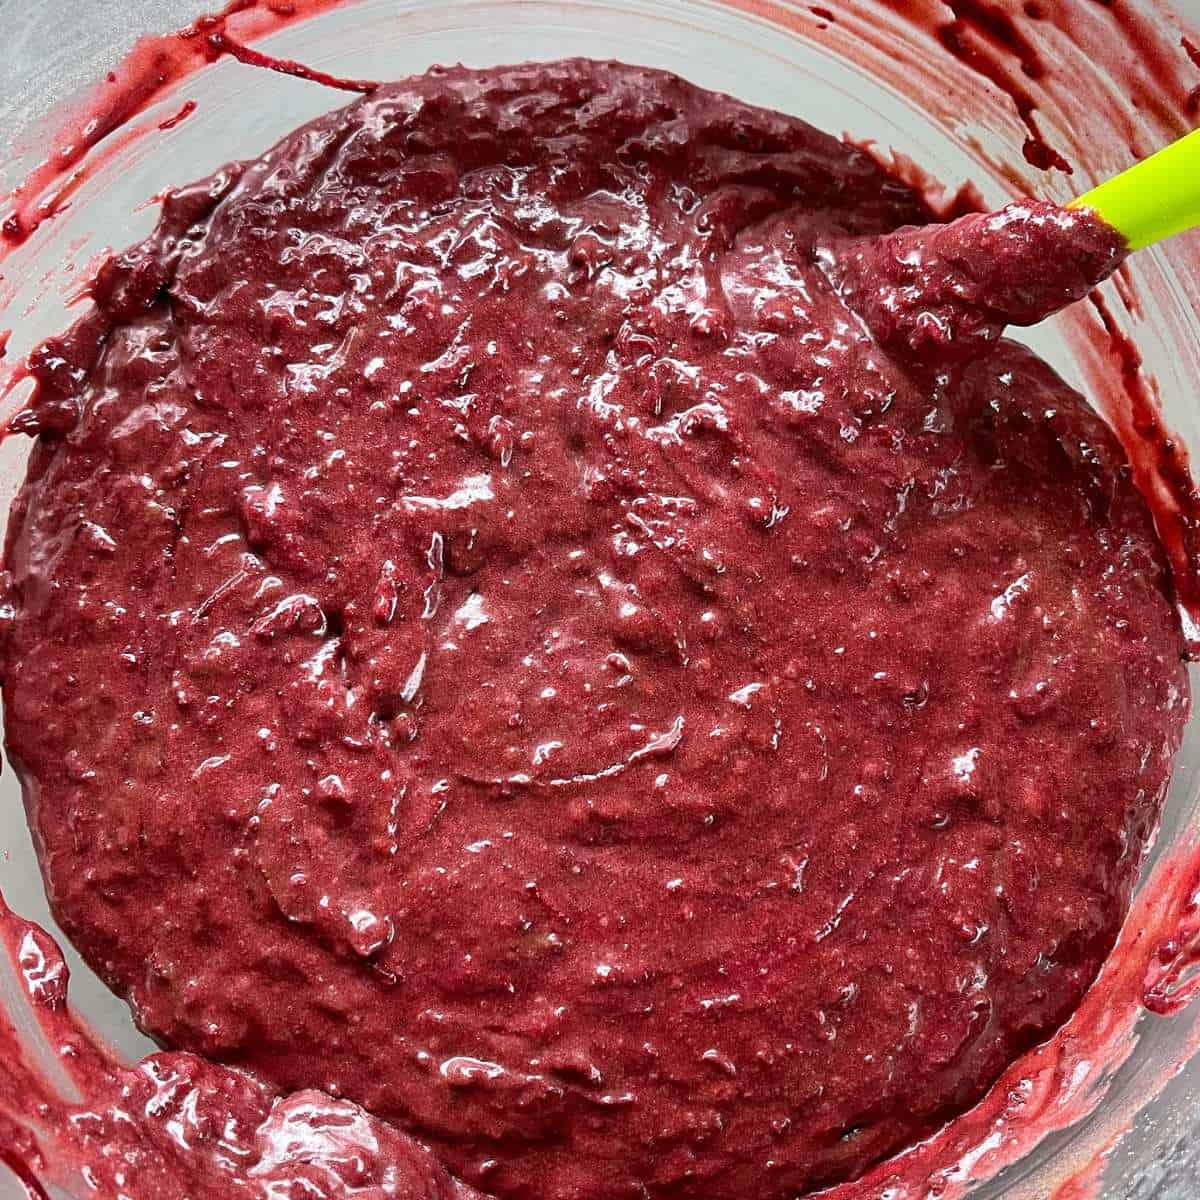 The combined grated beetroot and chocolate mixture to make Beetroot ad Chocolate Loaf.